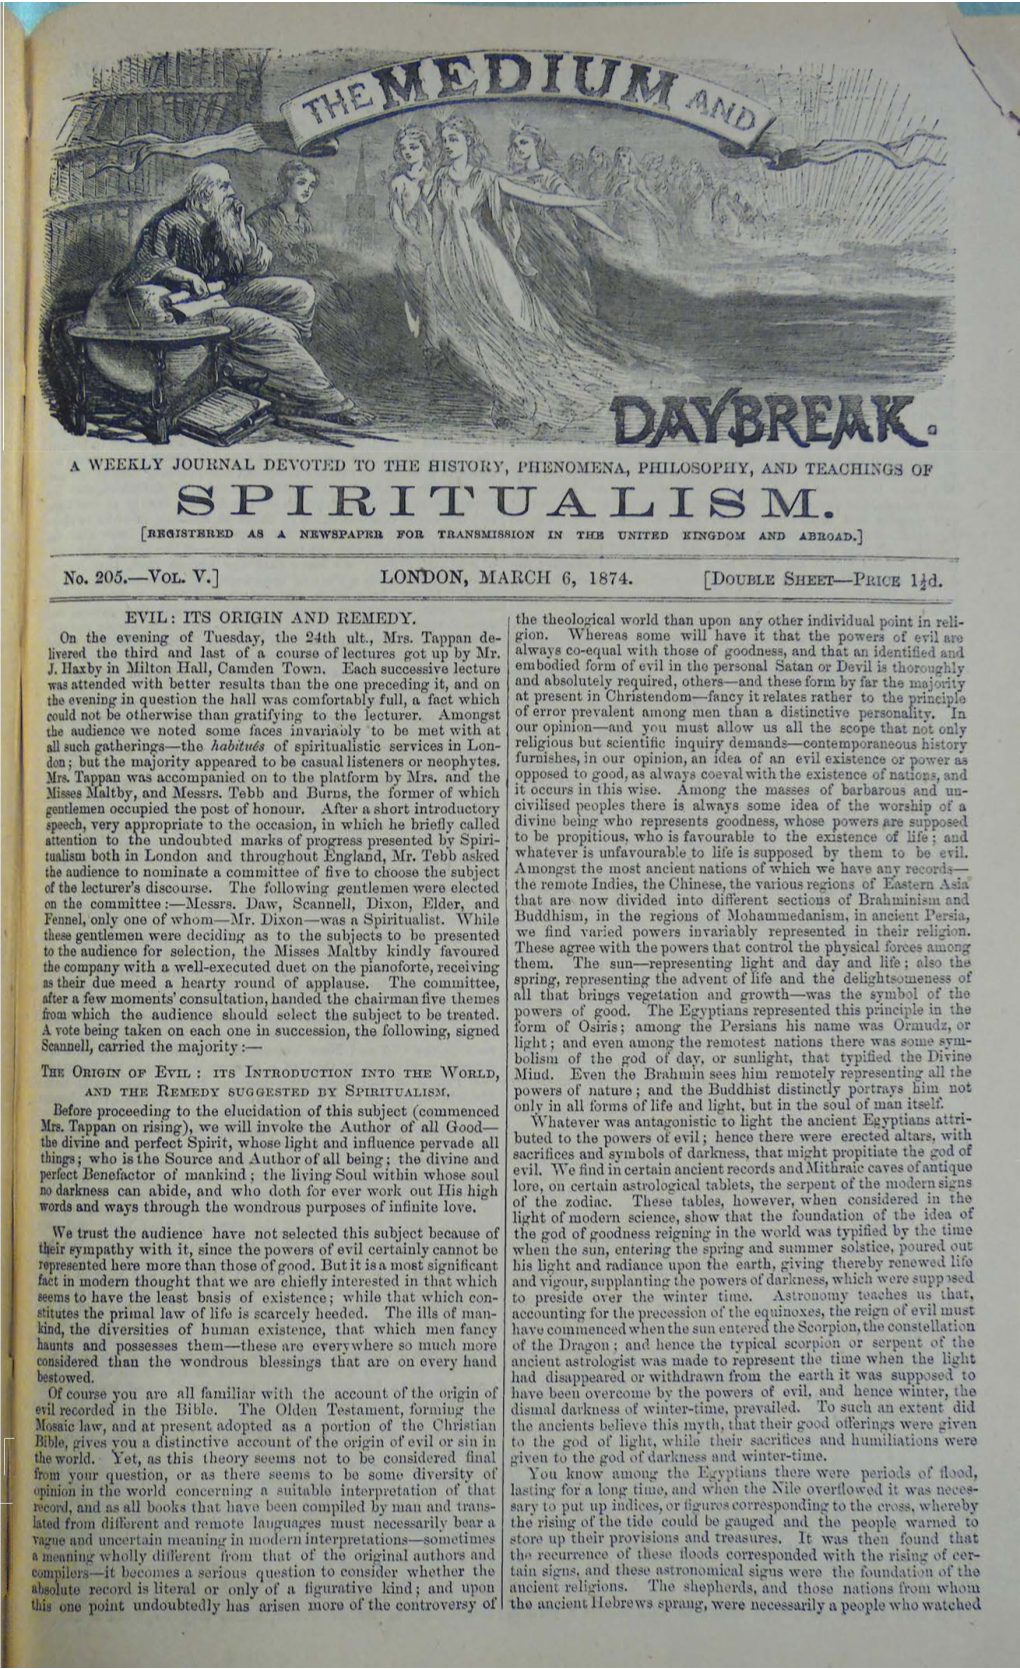 Spiritualism. [Registered As a Nkw8papkr For, Transmission in Tub United Kingdom and Abroad.]